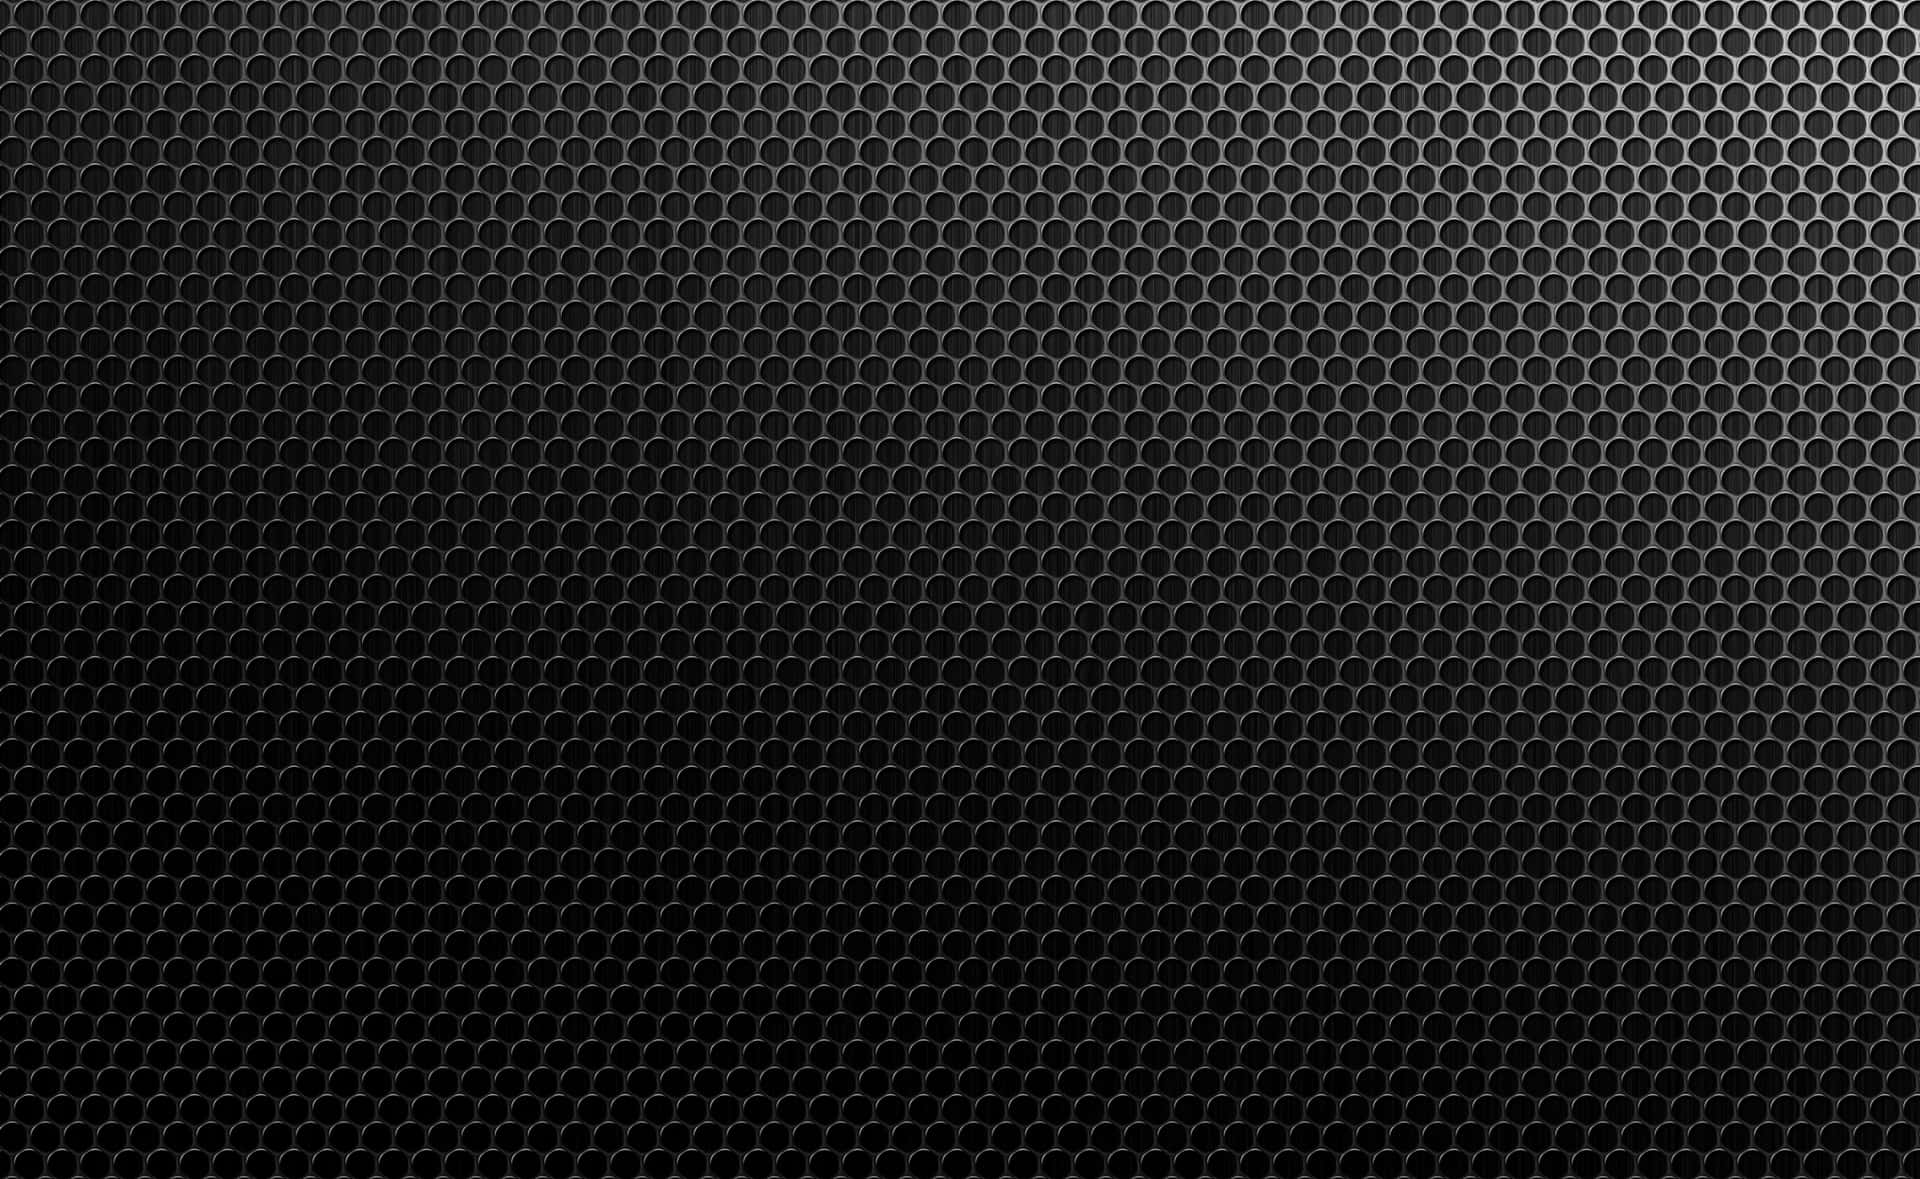 Dark and dynamic patterned background